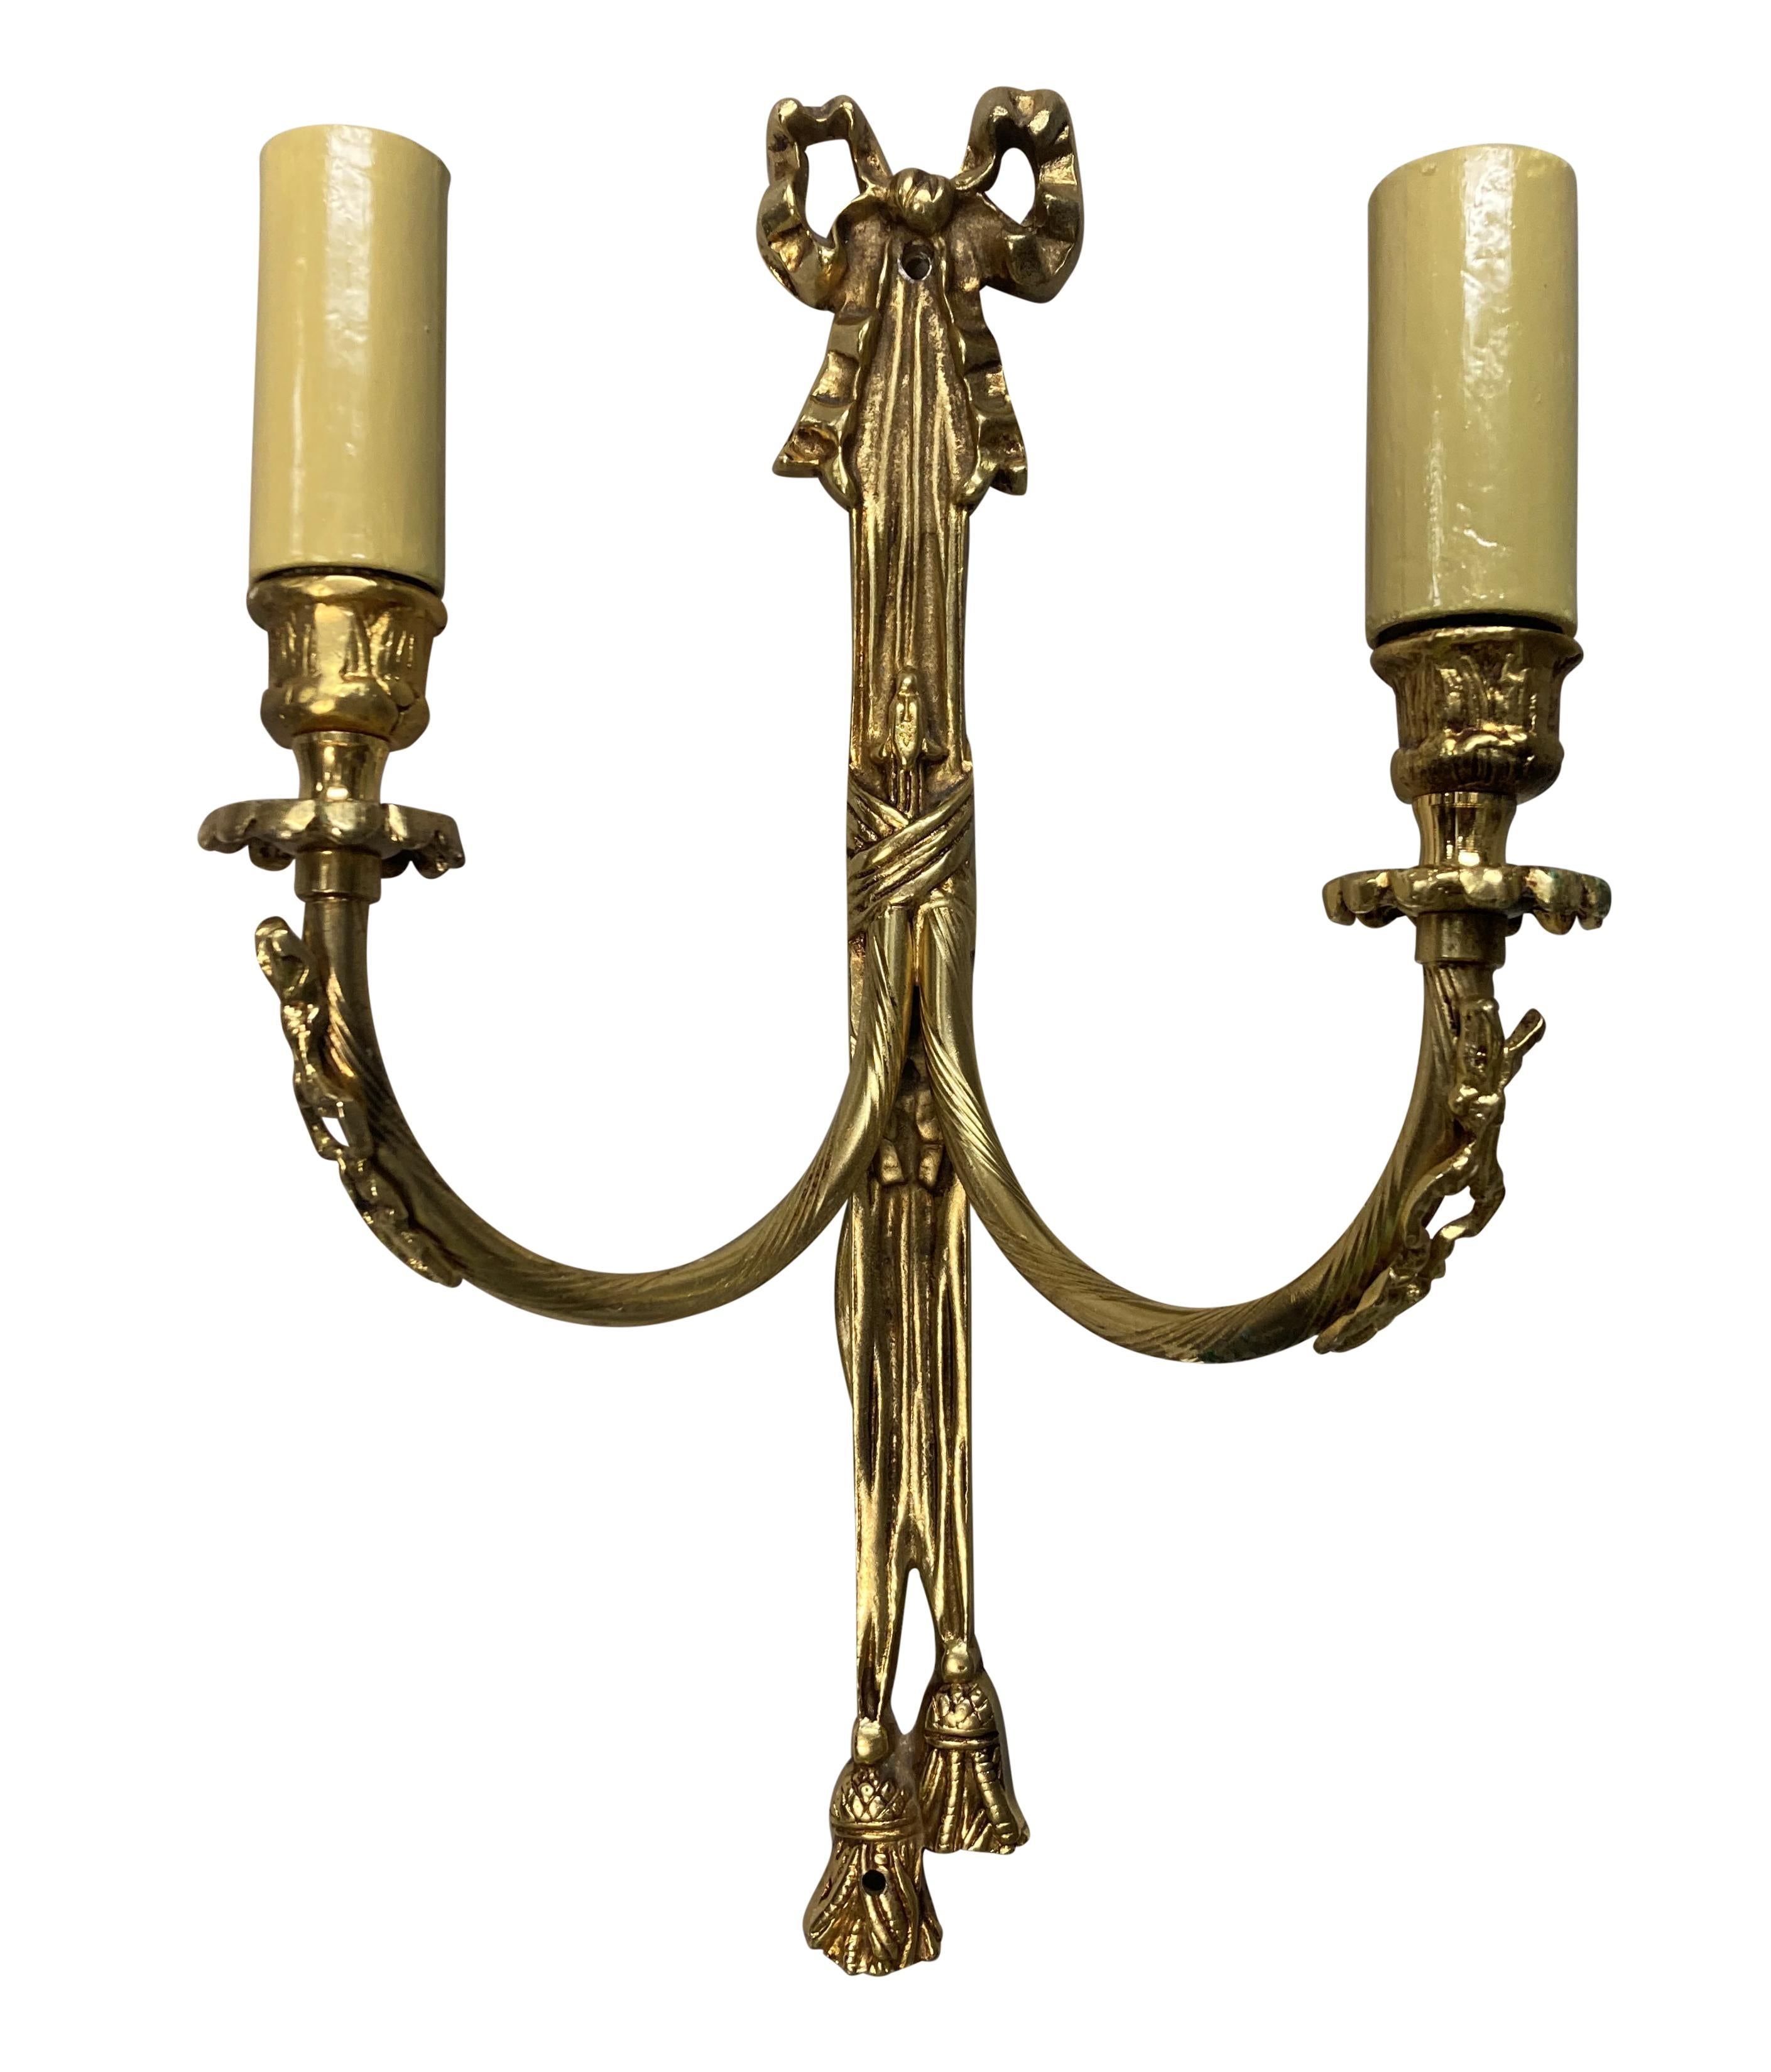 A set of six English twin branch wall lights in brass, with bows, tassles and swags.